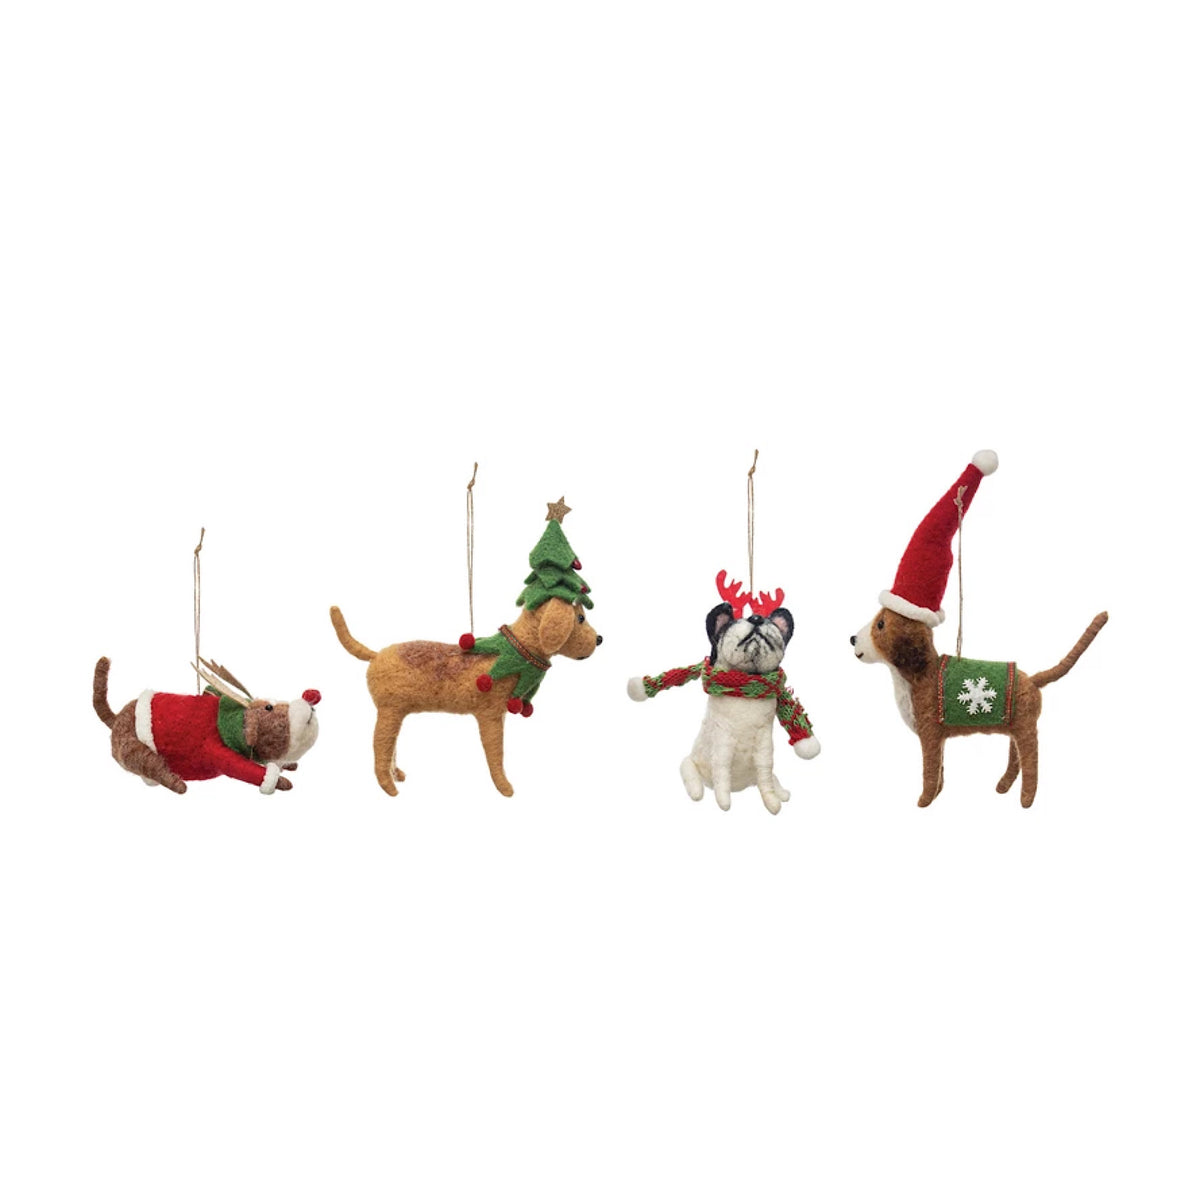 Wool Felt Dog Ornaments in Holiday Outfits